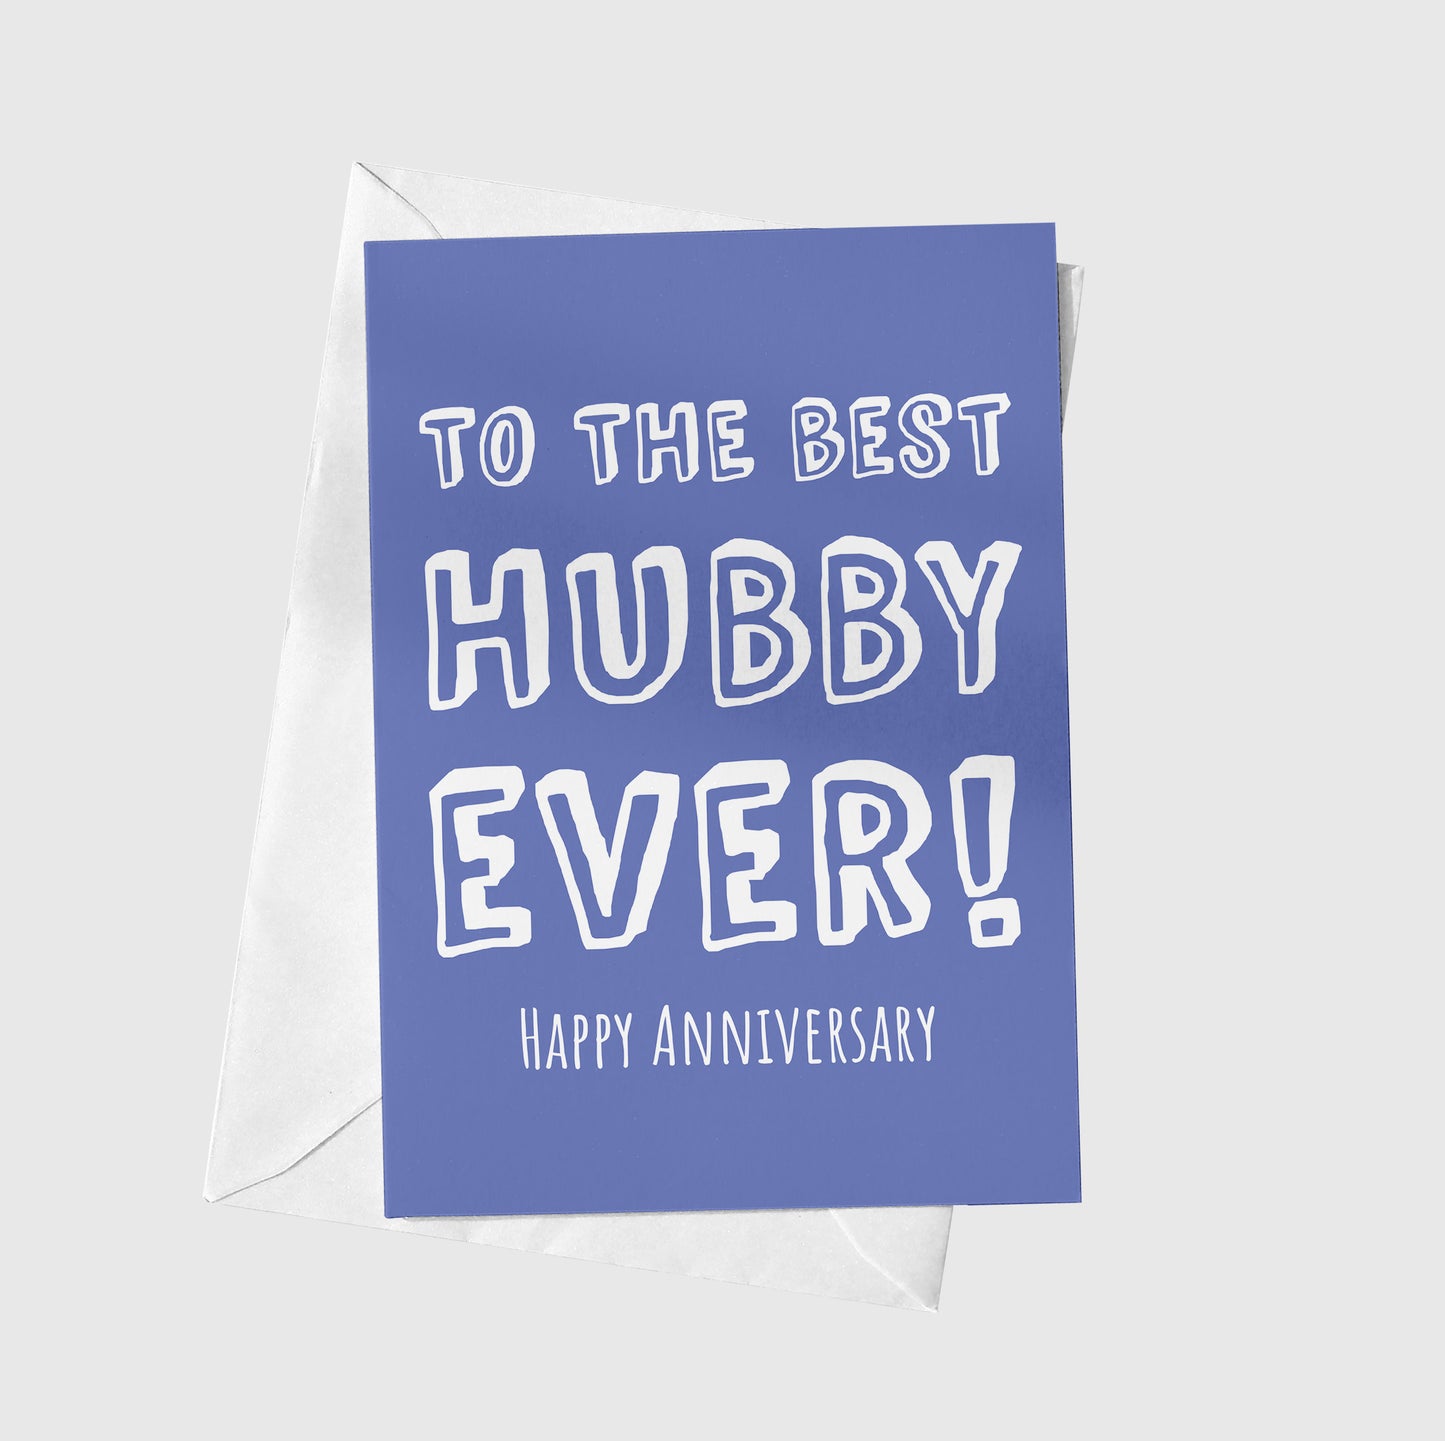 To The Best Hubby Ever!